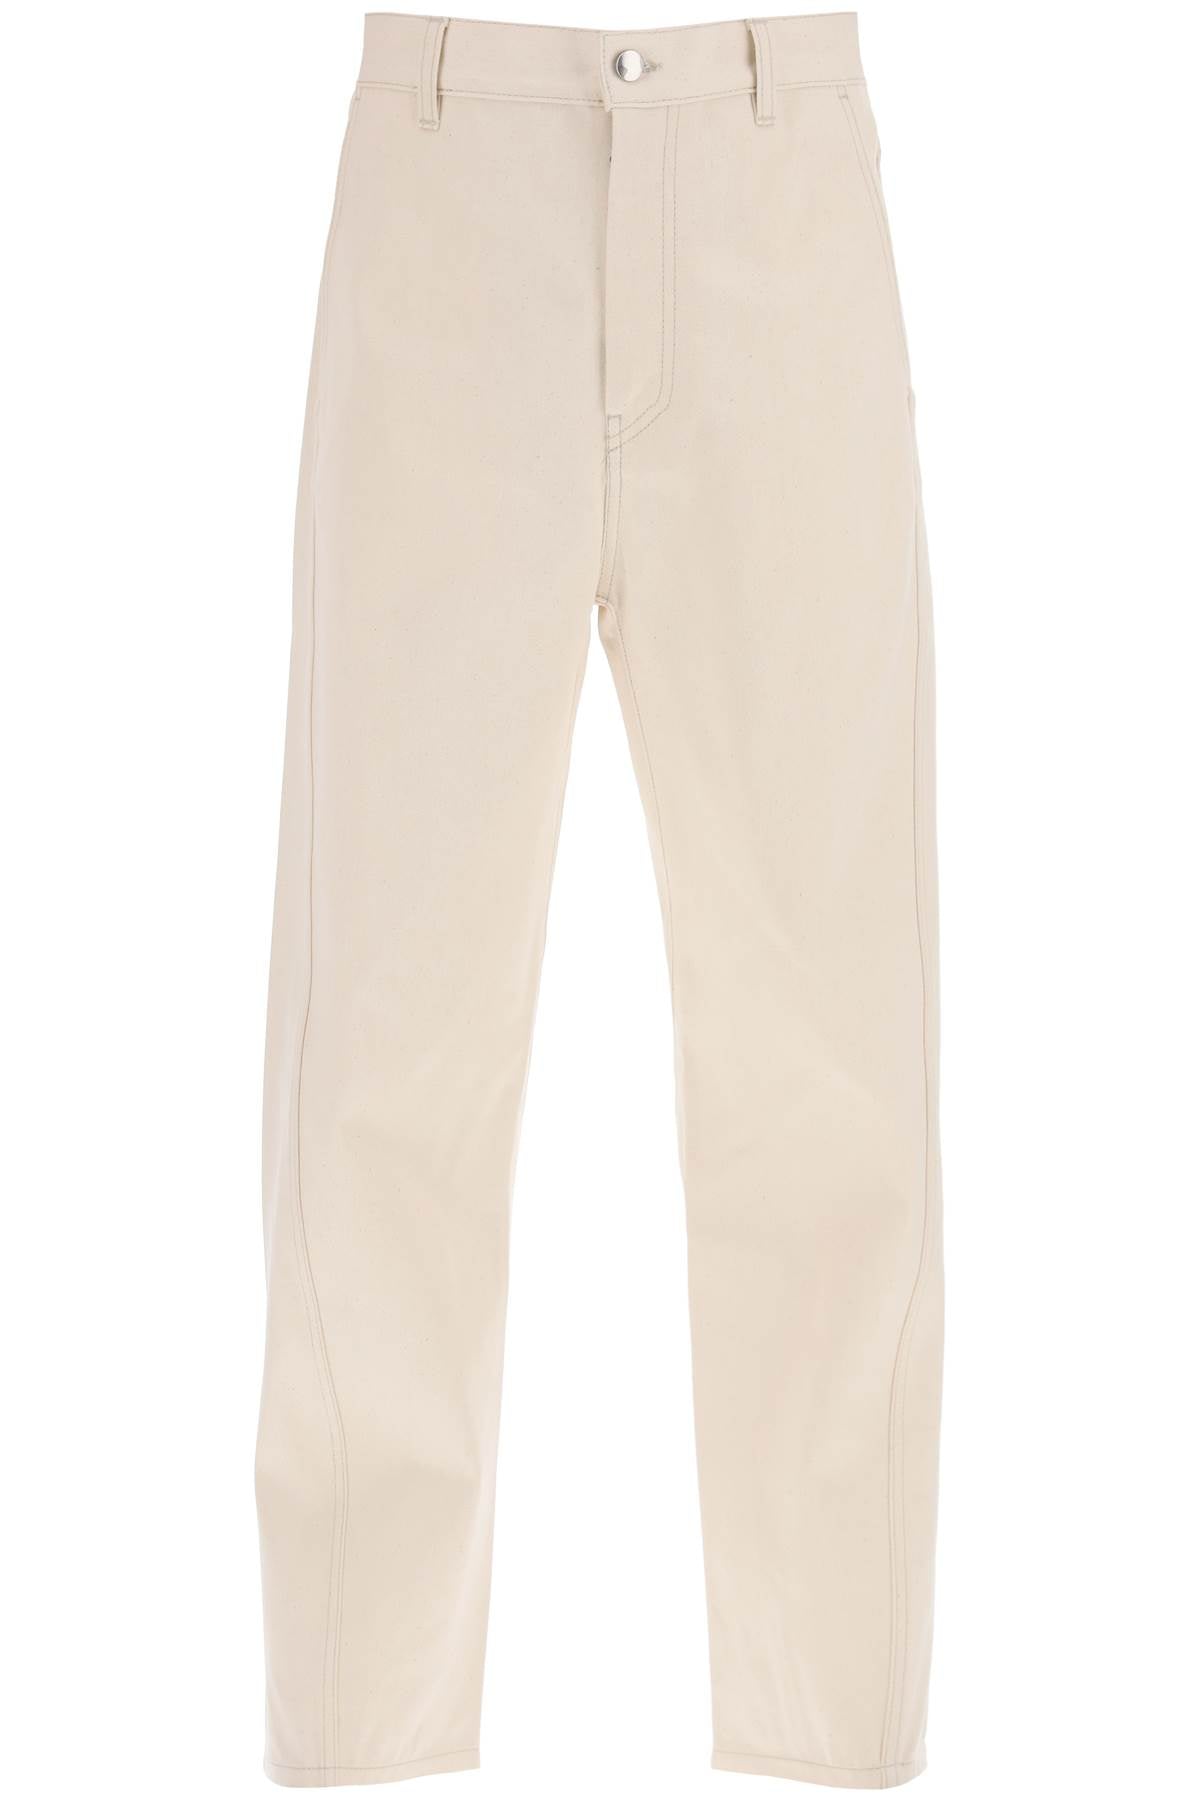 Oamc 'cortes' cropped jeans 23A28OAU24 COT00898 NATURAL WHITE